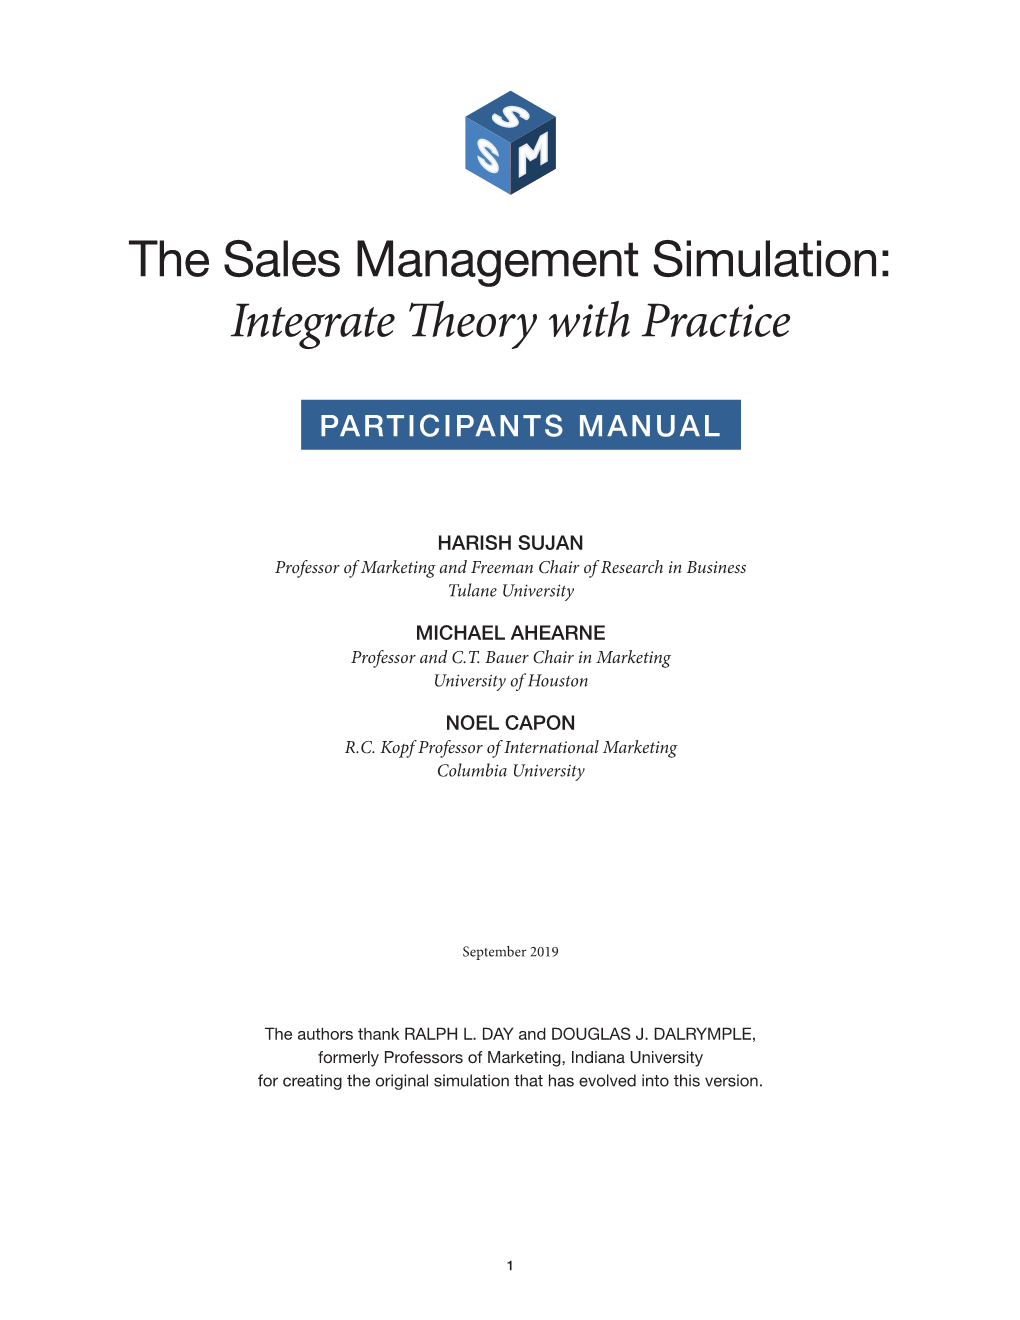 The Sales Management Simulation: Integrate Theory with Practice